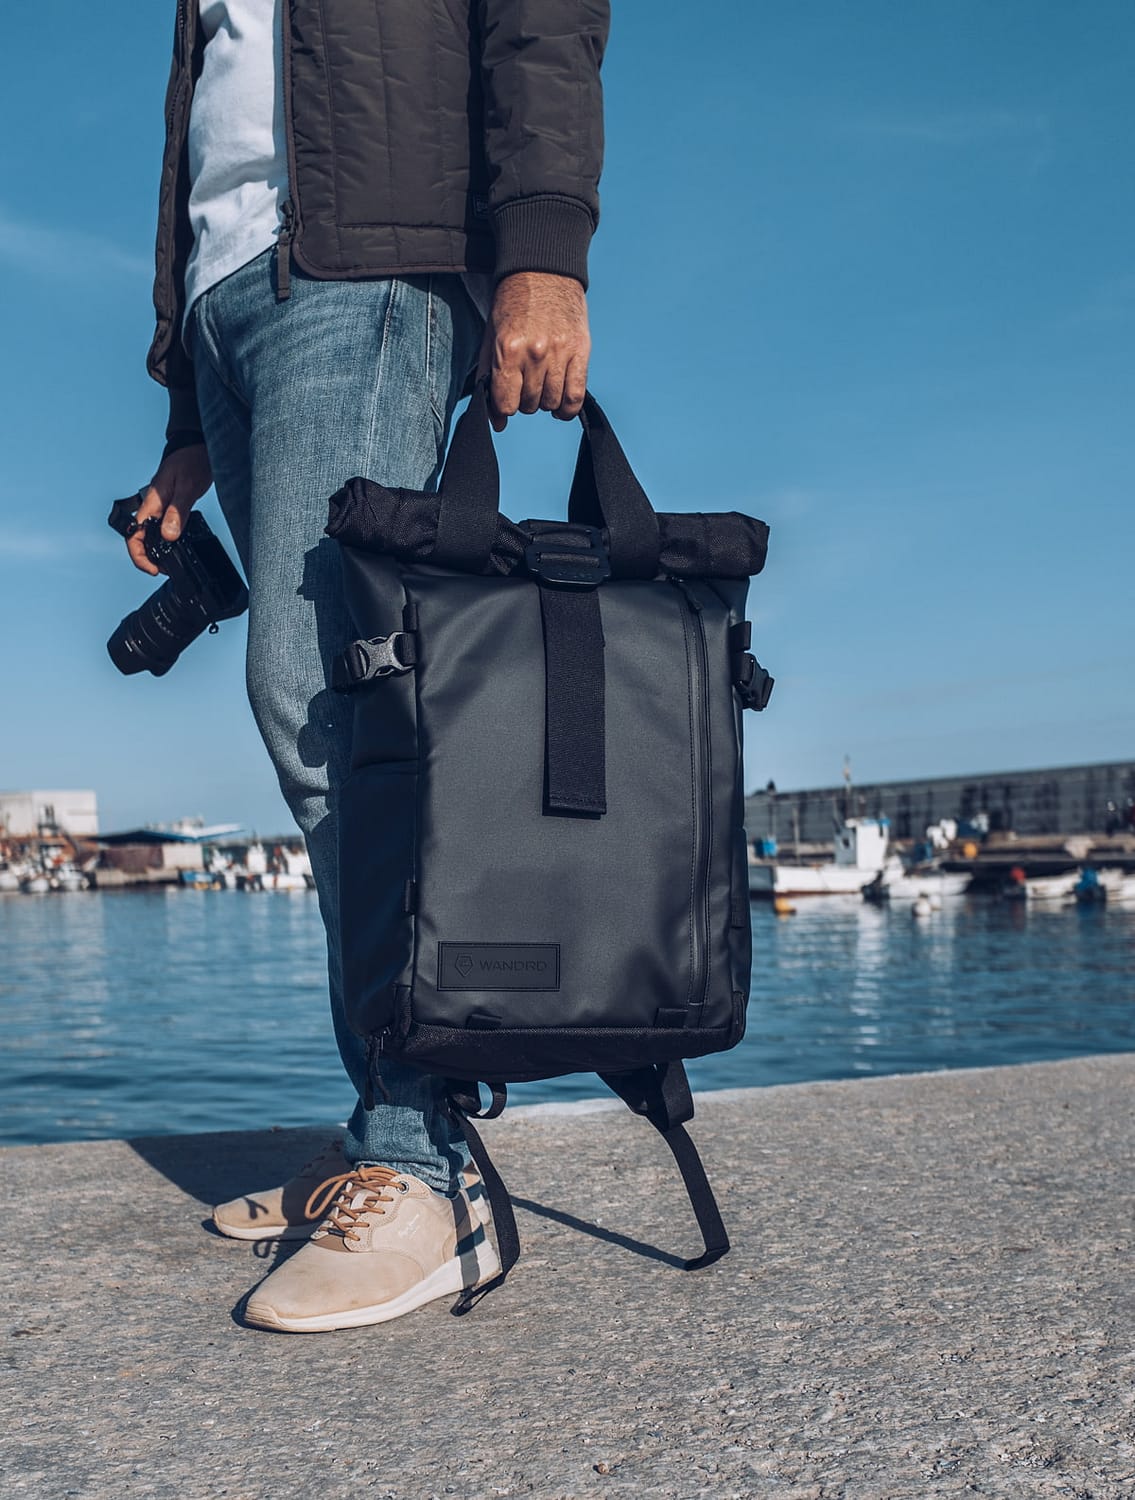 Best Backpack for Travel and Photography